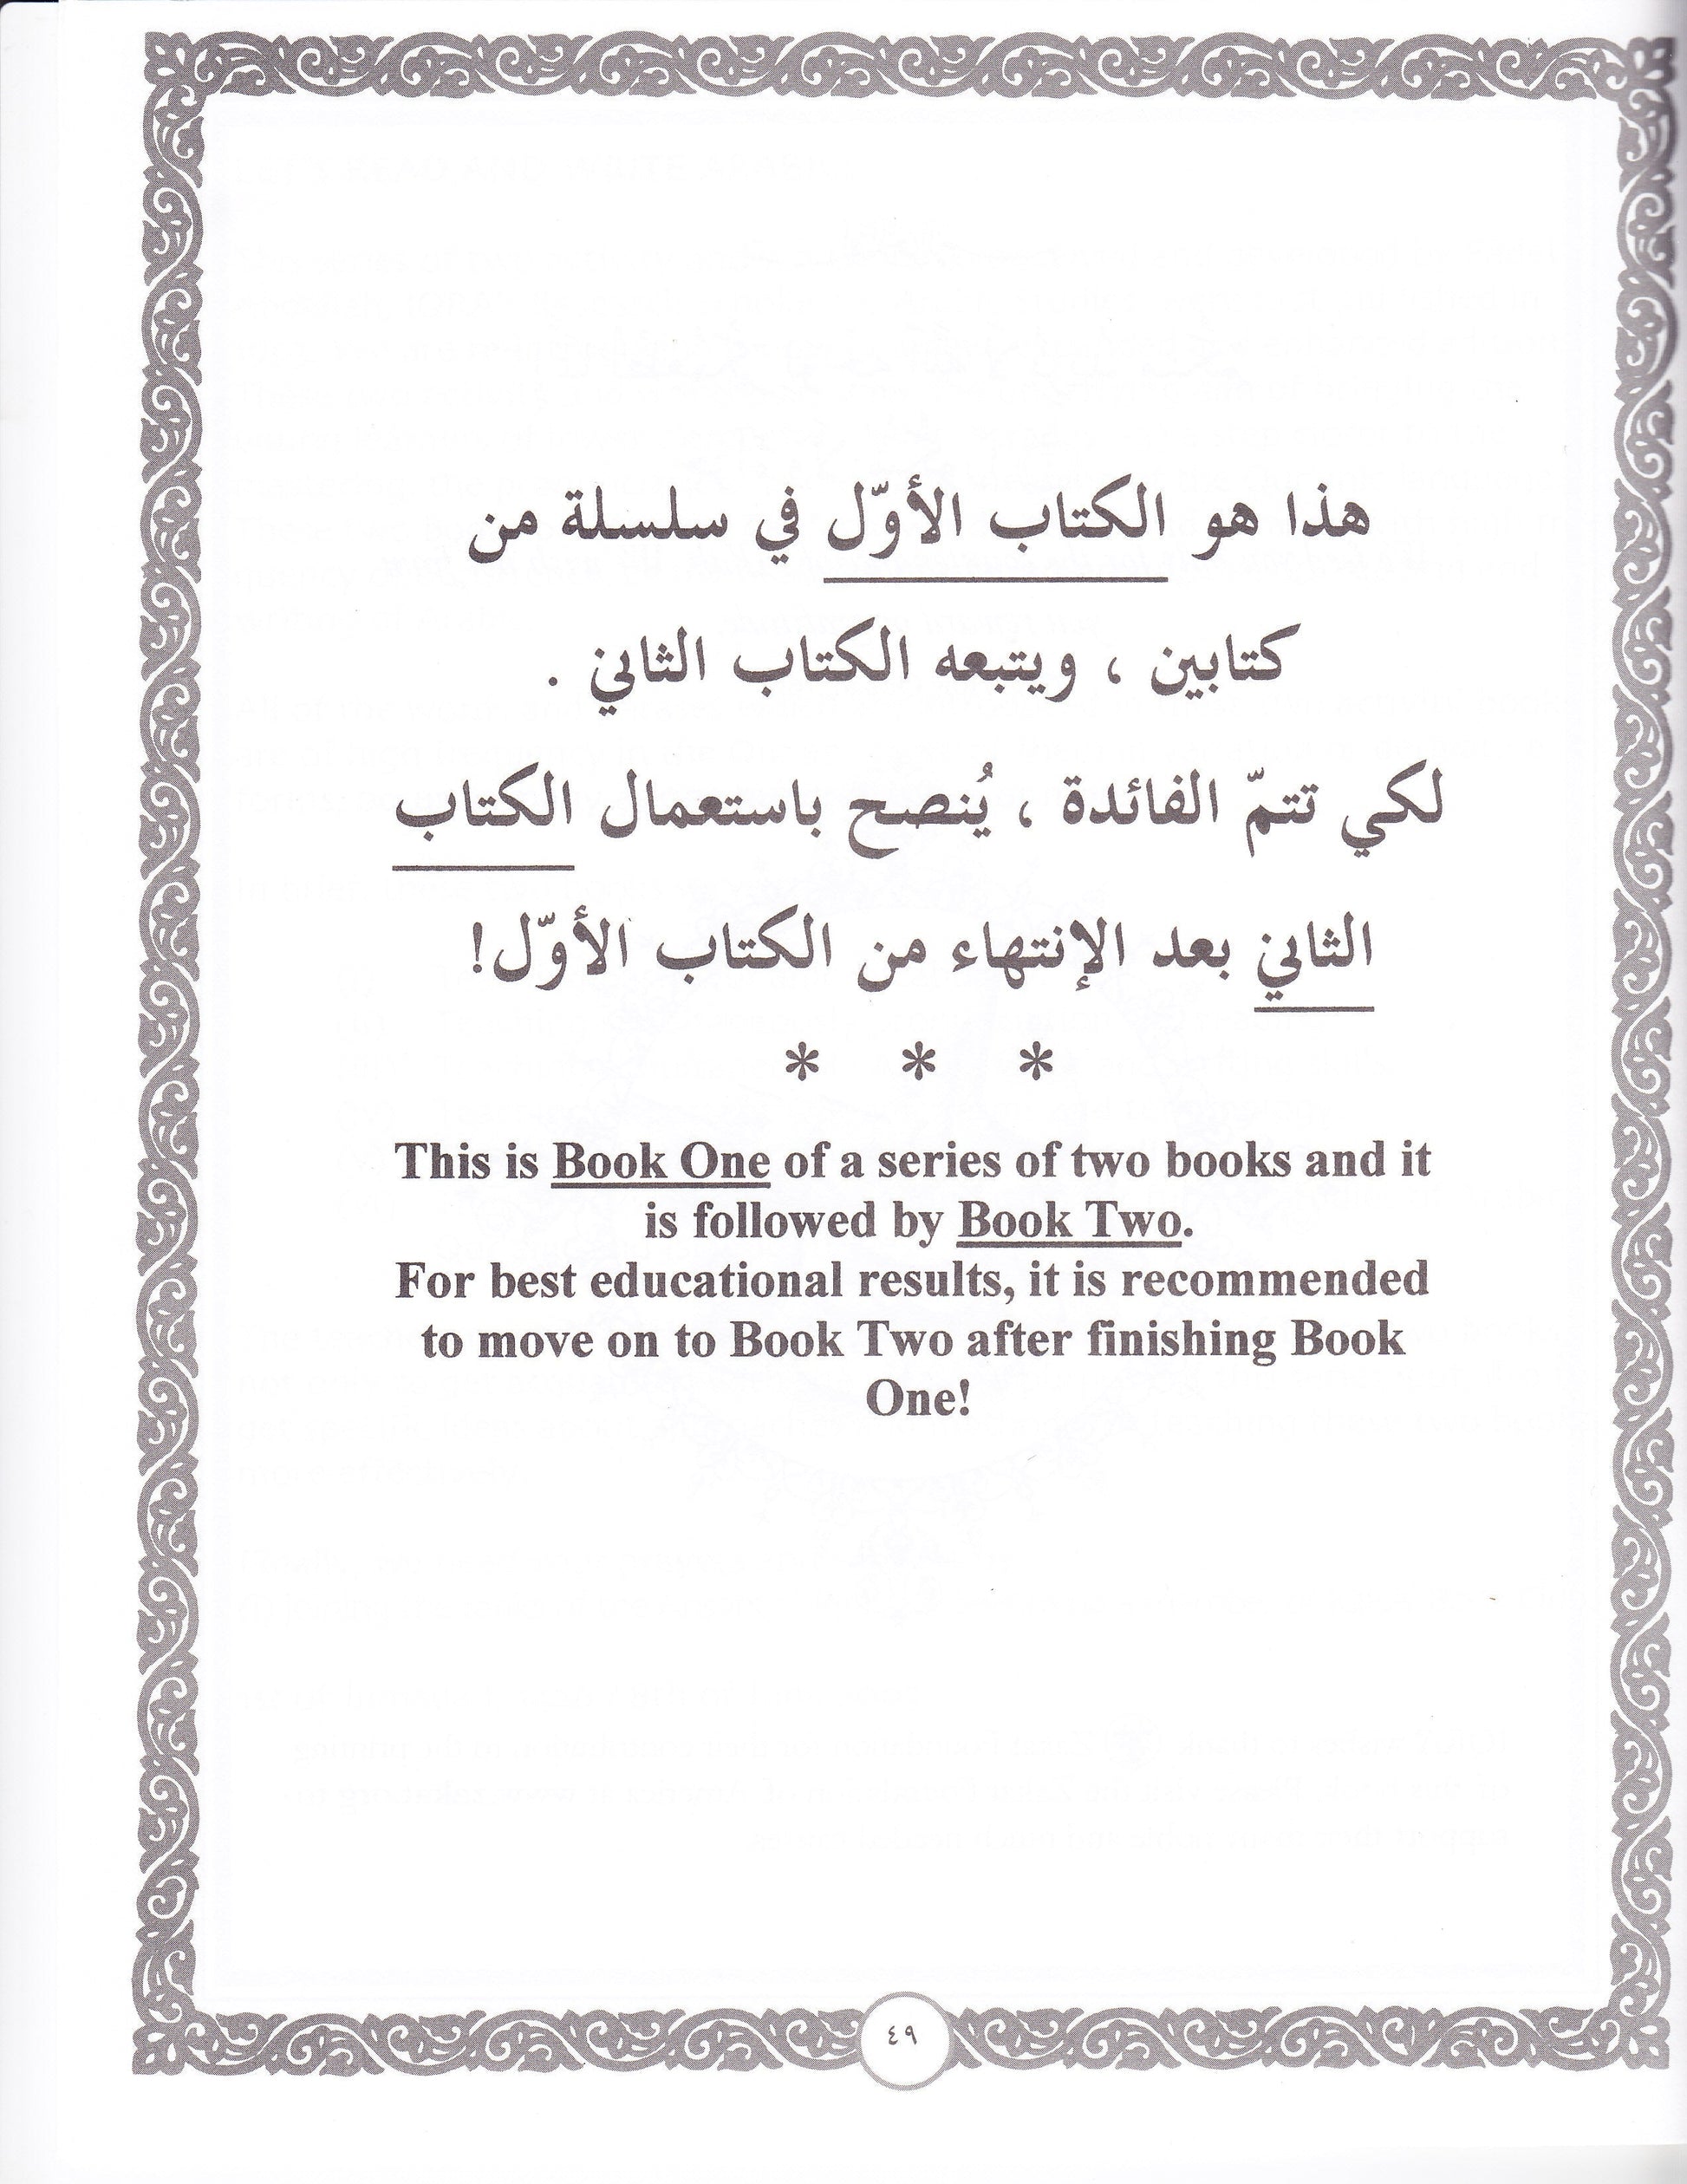 Let's Read & Write Arabic Book 1 - Premium Textbook from IQRA' international Educational Foundation - Just $6! Shop now at IQRA' international Educational Foundation